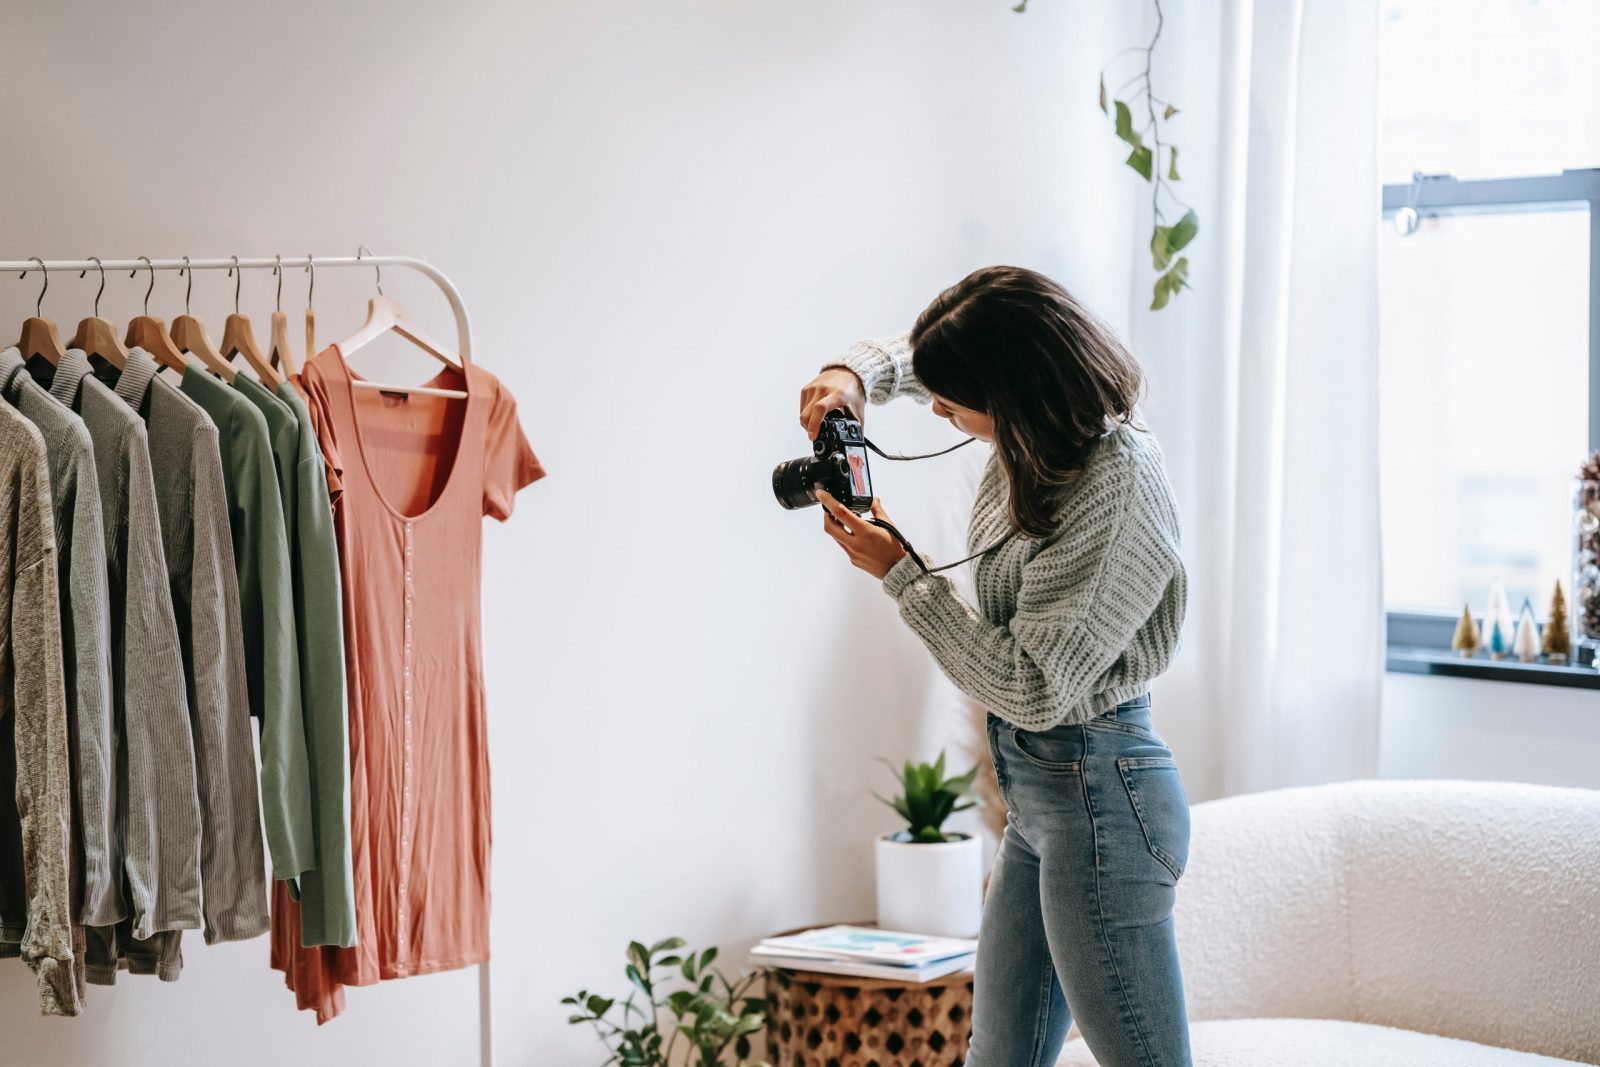 Fashion entrepreneur taking product images and videos in a fashion studio.